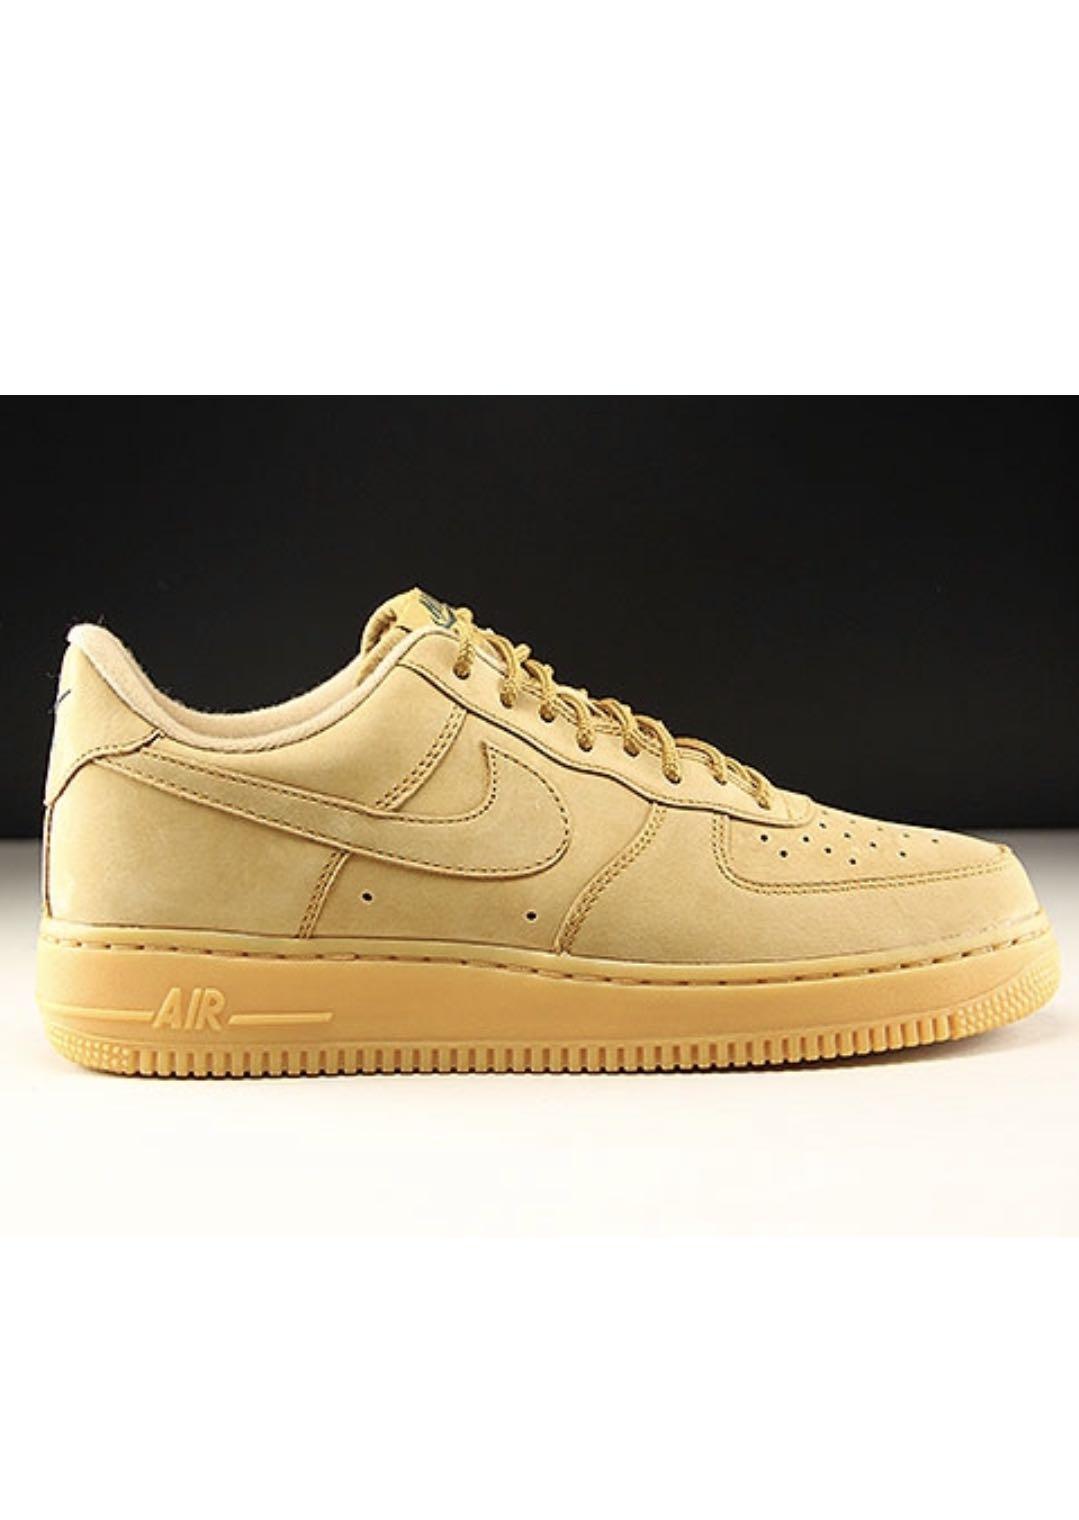 Nike Air Force 1 Low Retro SP Wheat 